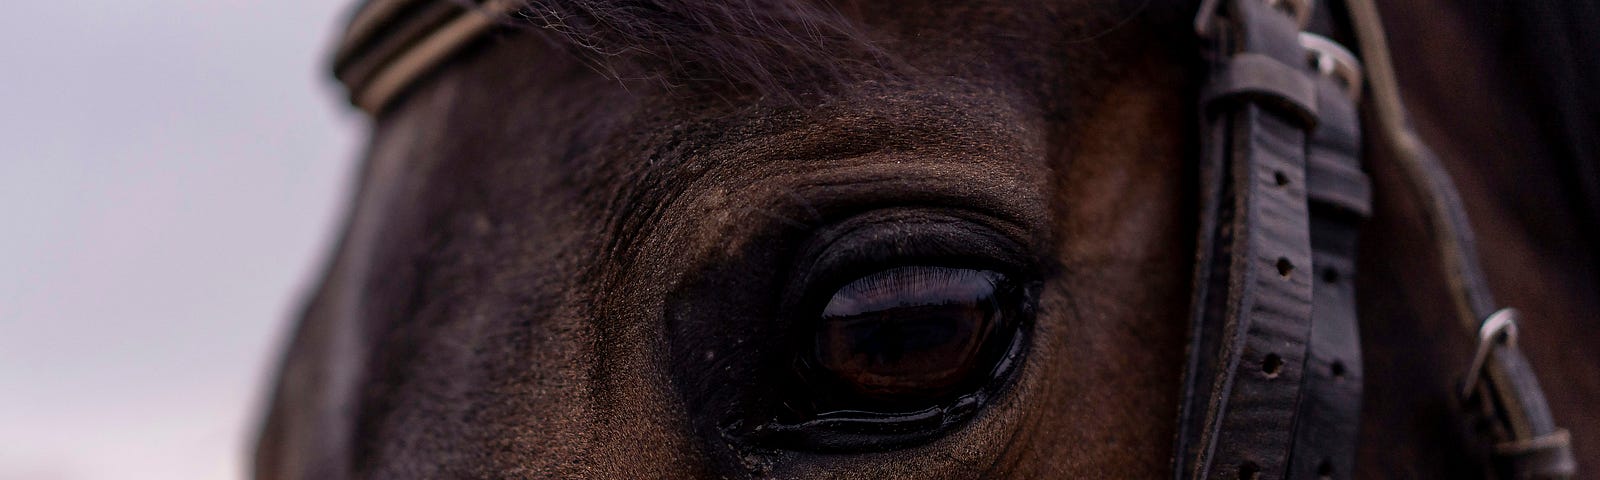 Close up of a horse’s face, someone touching it